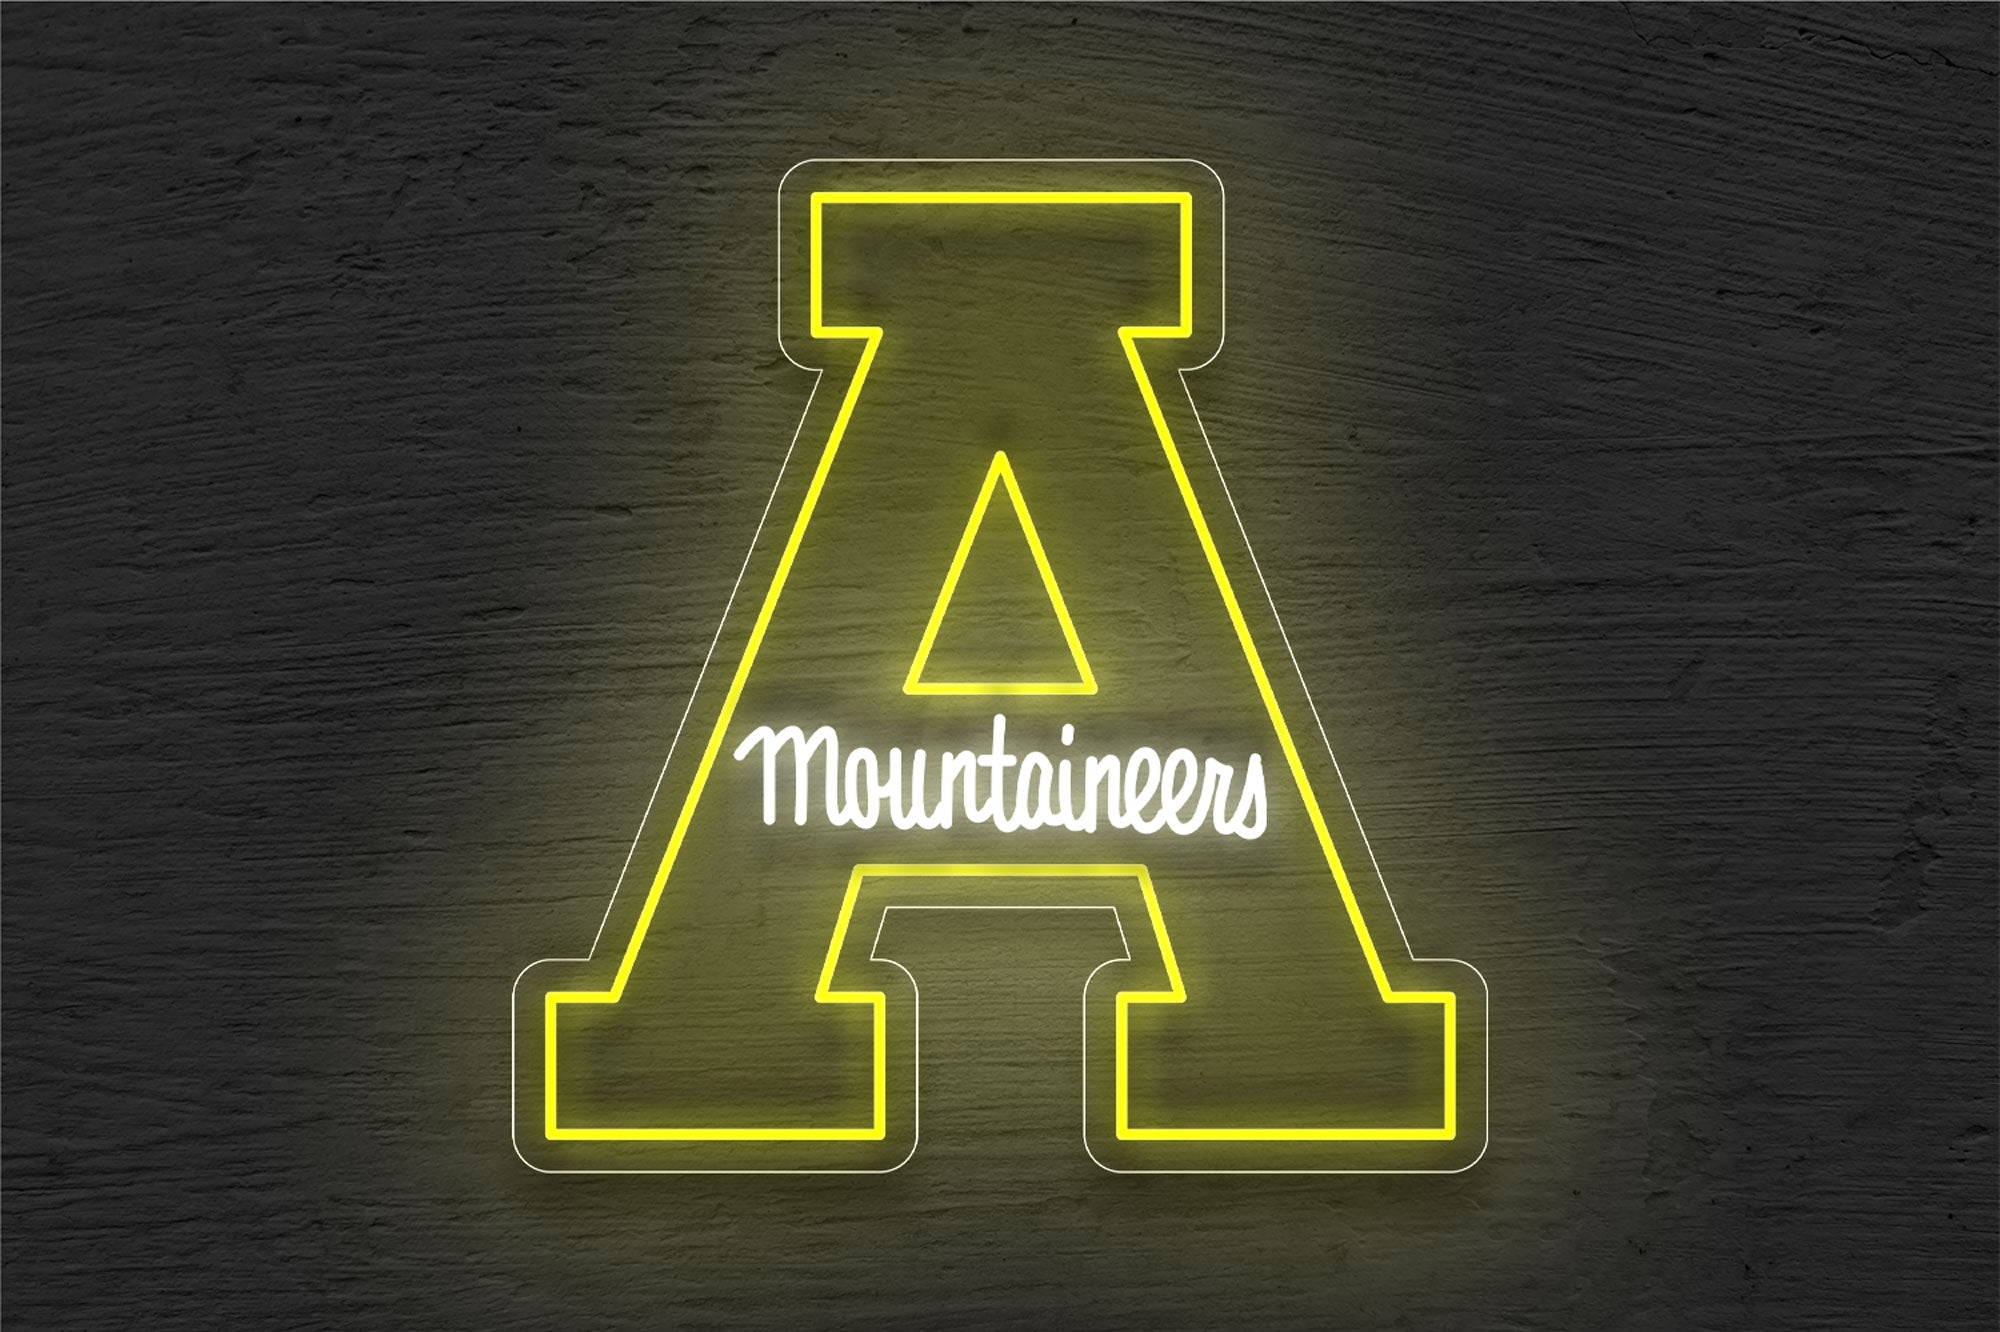 Appalachian State Mountaineers Men's Basketball LED Neon Sign